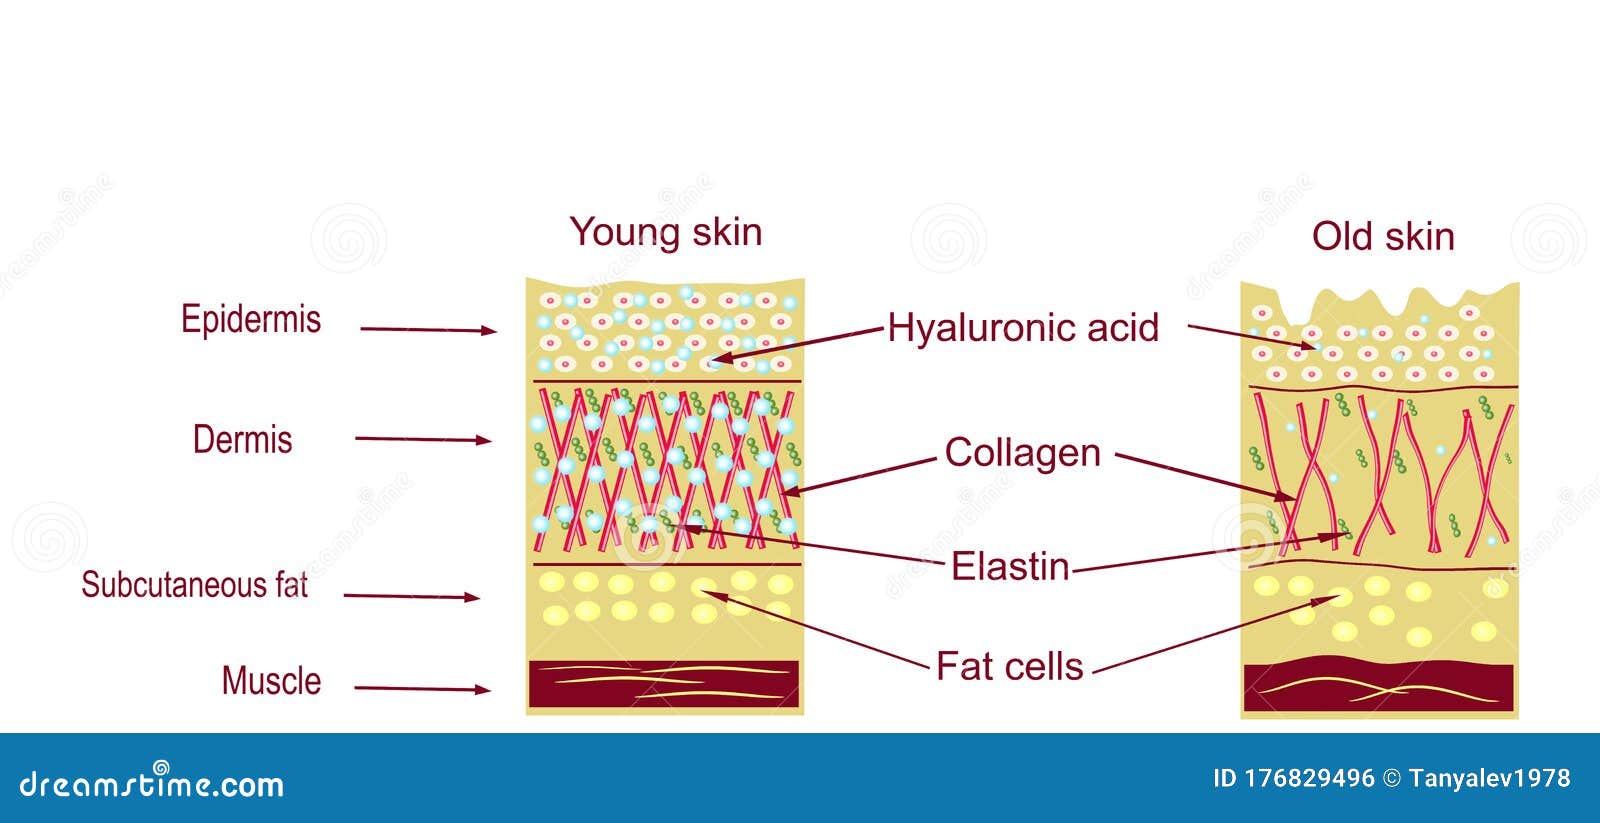 the anatomical structure of the skin. elastin, hyaluronic acid, collagen. skin aging, wrinkles before and after